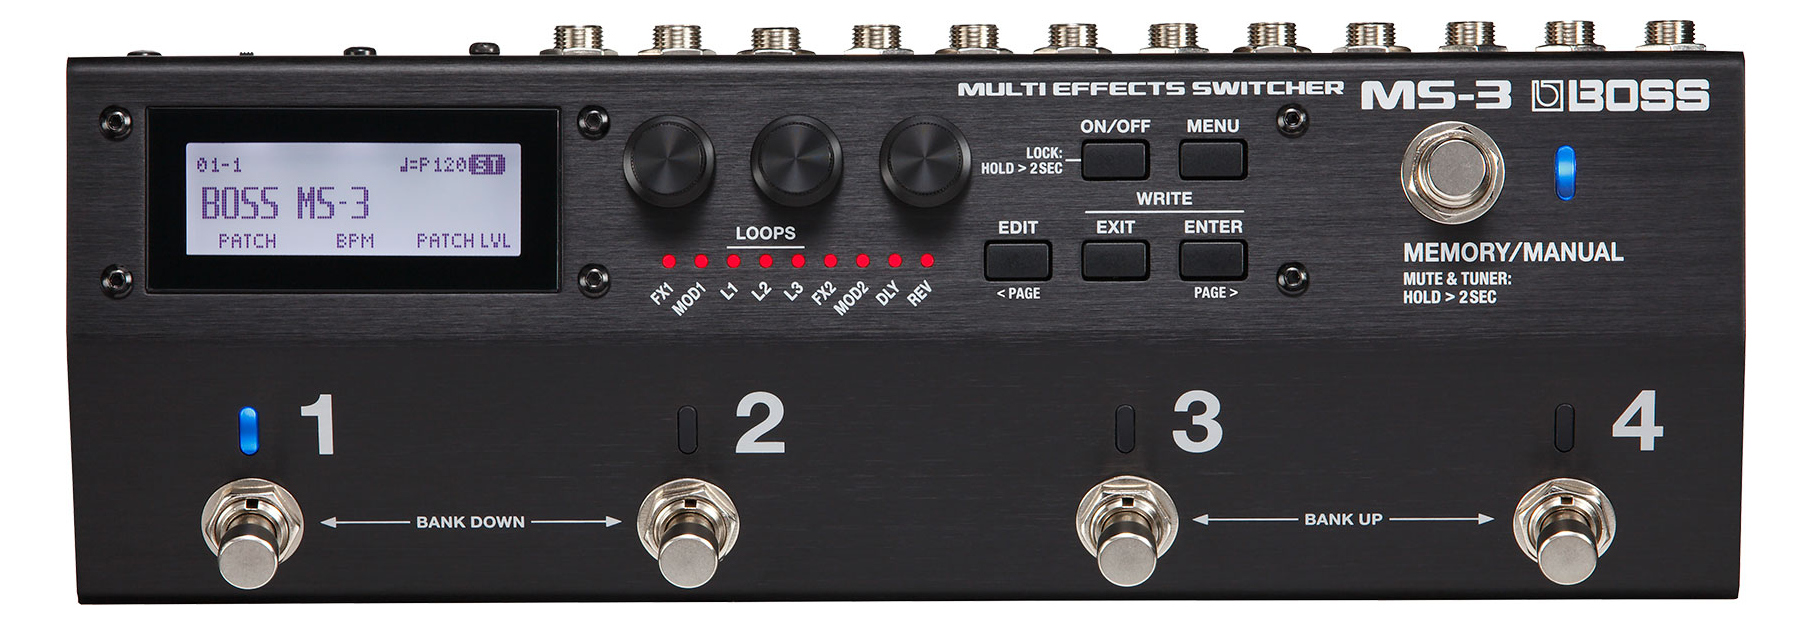 MS-3 Multi Effects Switcher-